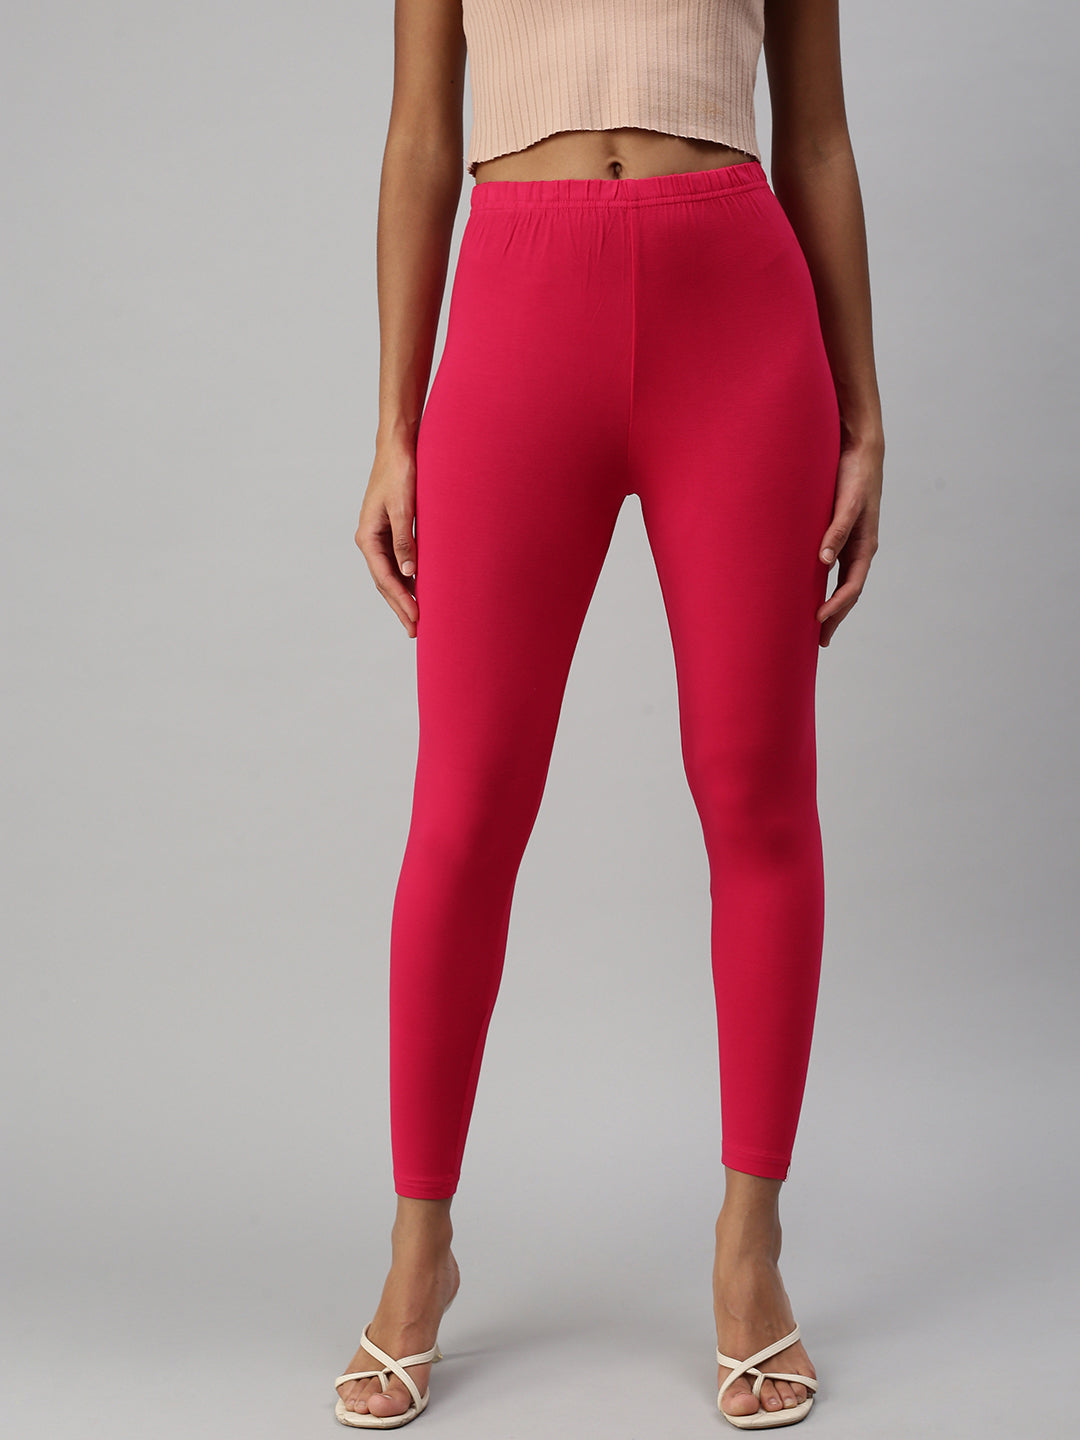 Shop Prisma's Strawberry Ankle Leggings for Comfort & Style